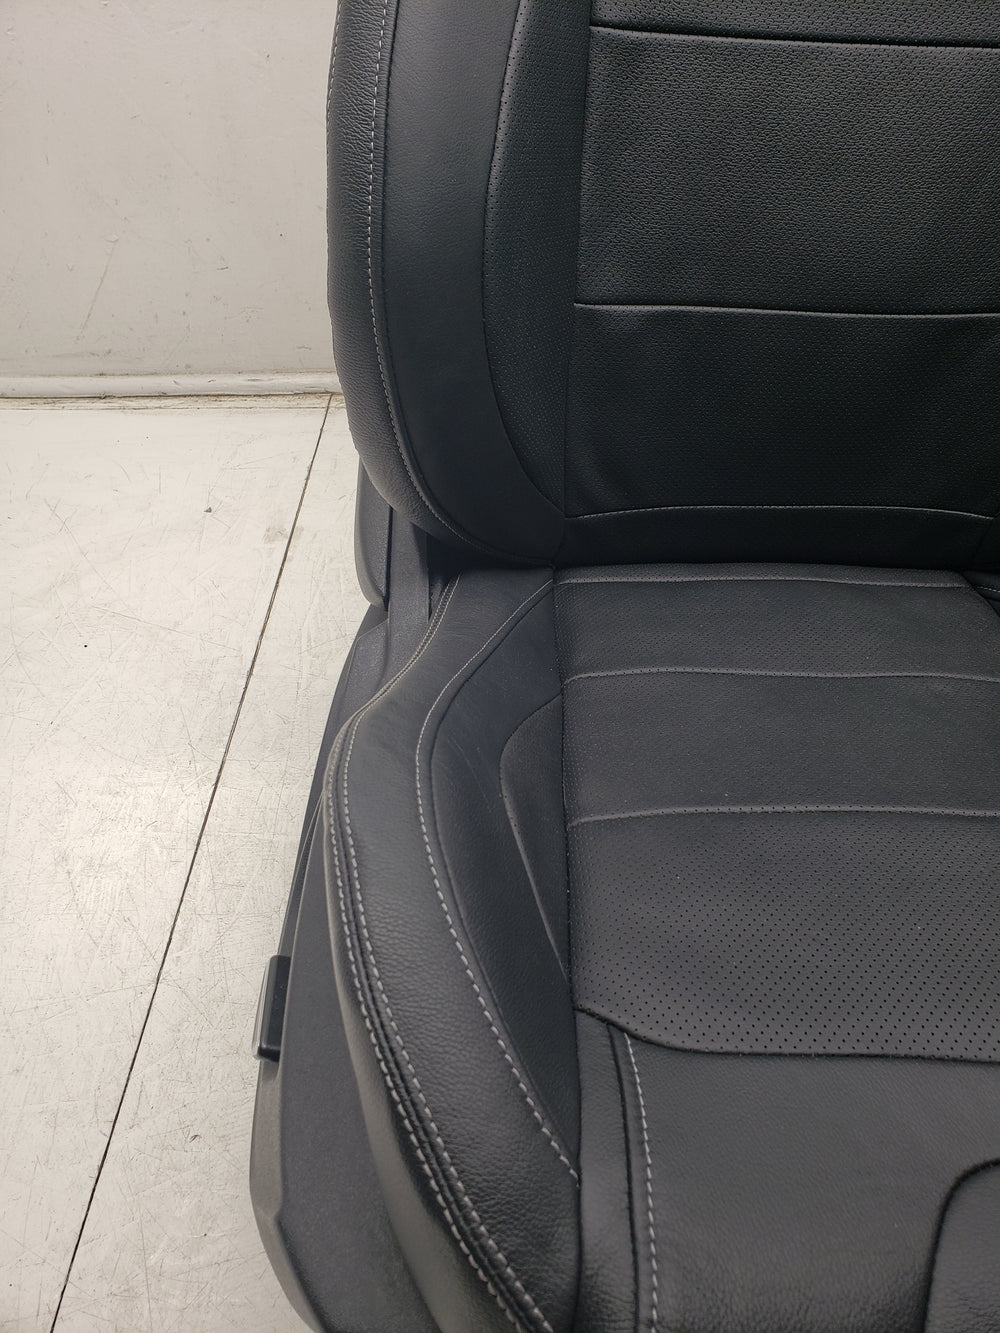 Mustang Recaro Seats, Heated & Cooled, Powered, Custom Ford 2015 - 2023 | Picture # 6 | OEM Seats